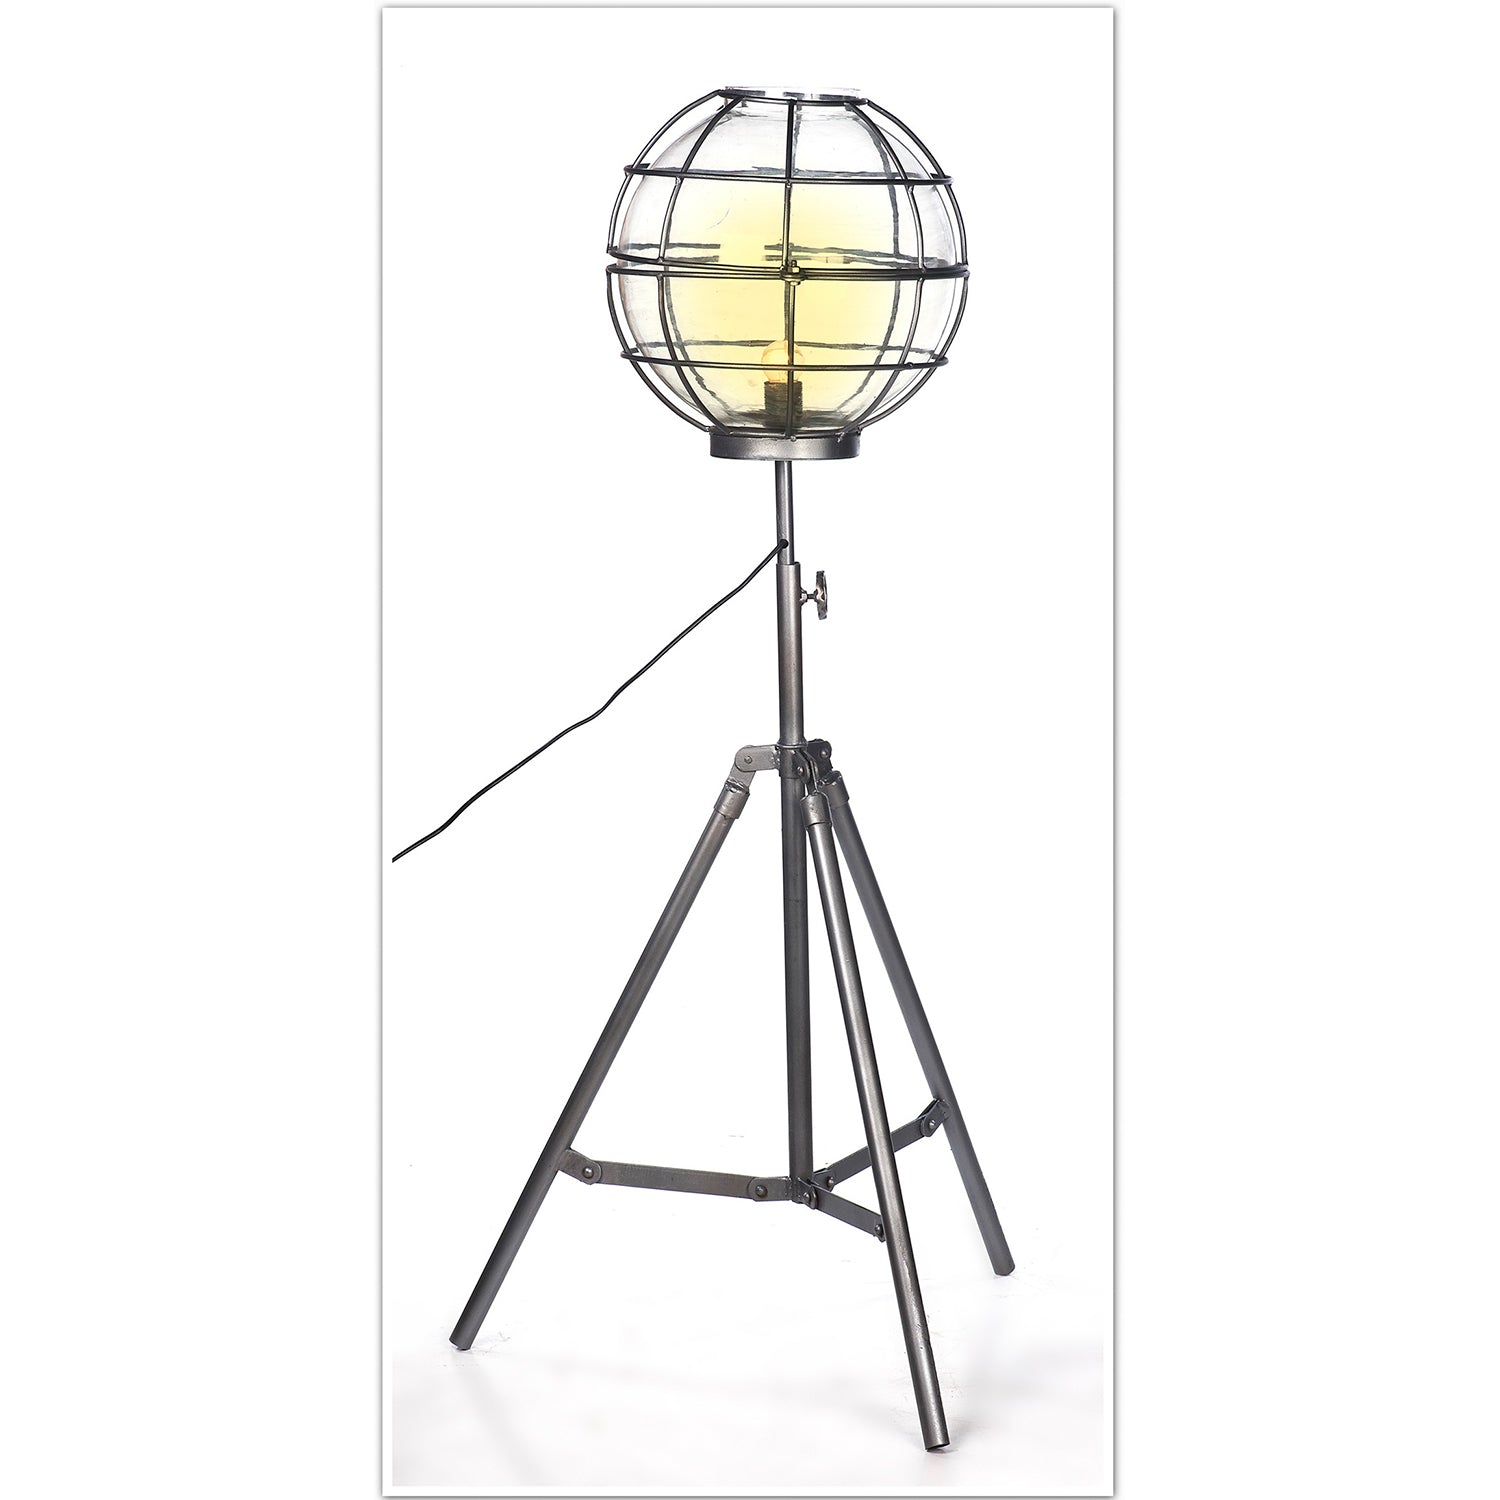 Upcycled Floor Lamp With Round Cage